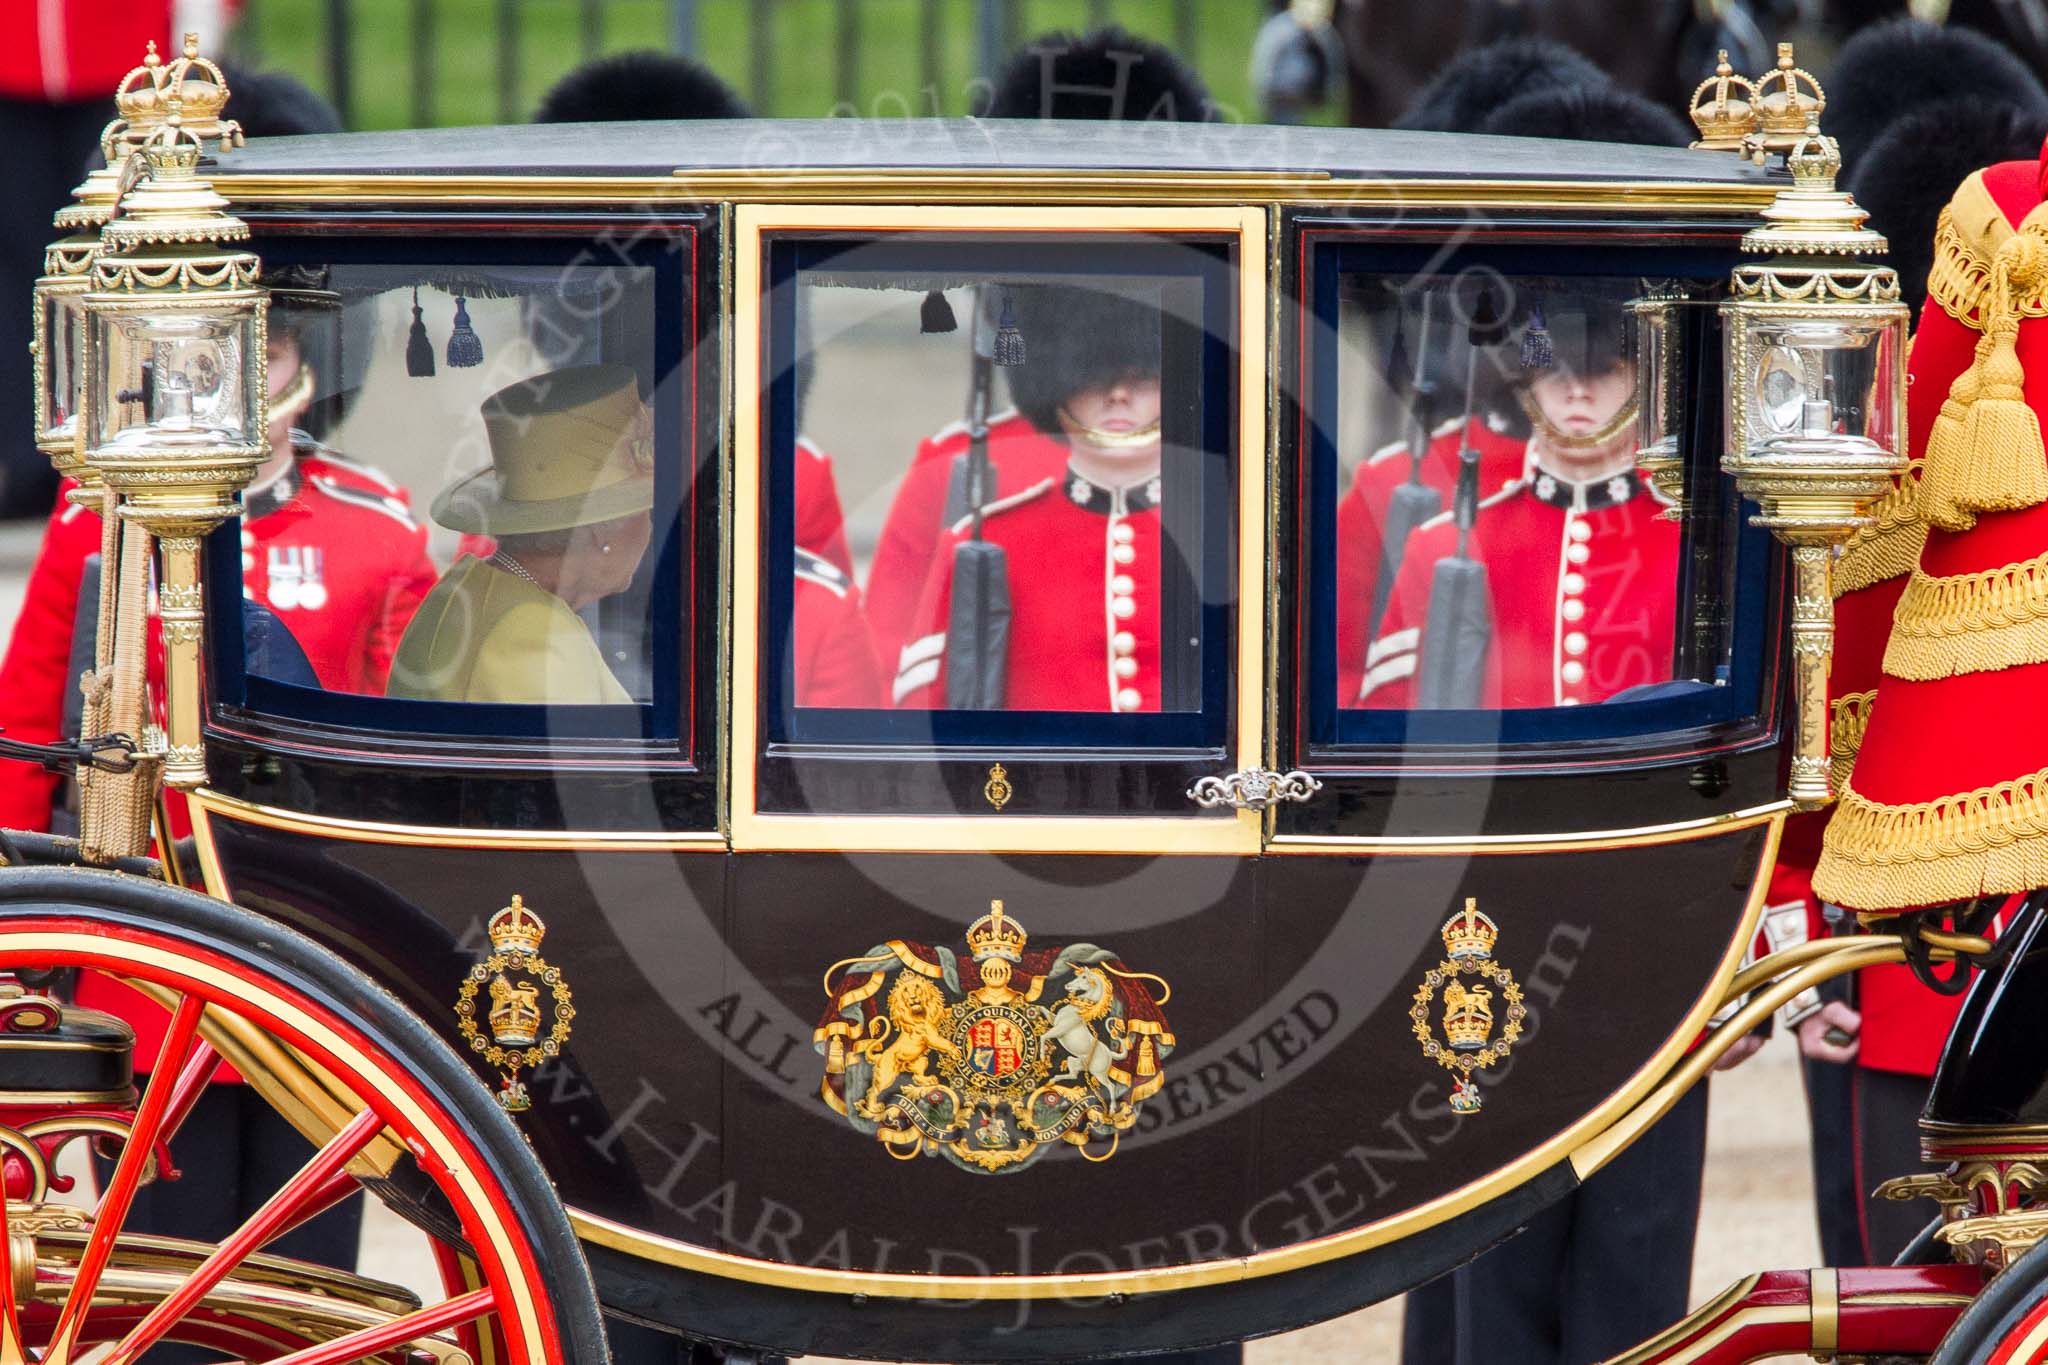 Trooping the Colour 2012: A closer view of HM The Queen in the Glass Coach during the Inspection of the Line..
Horse Guards Parade, Westminster,
London SW1,

United Kingdom,
on 16 June 2012 at 11:03, image #215